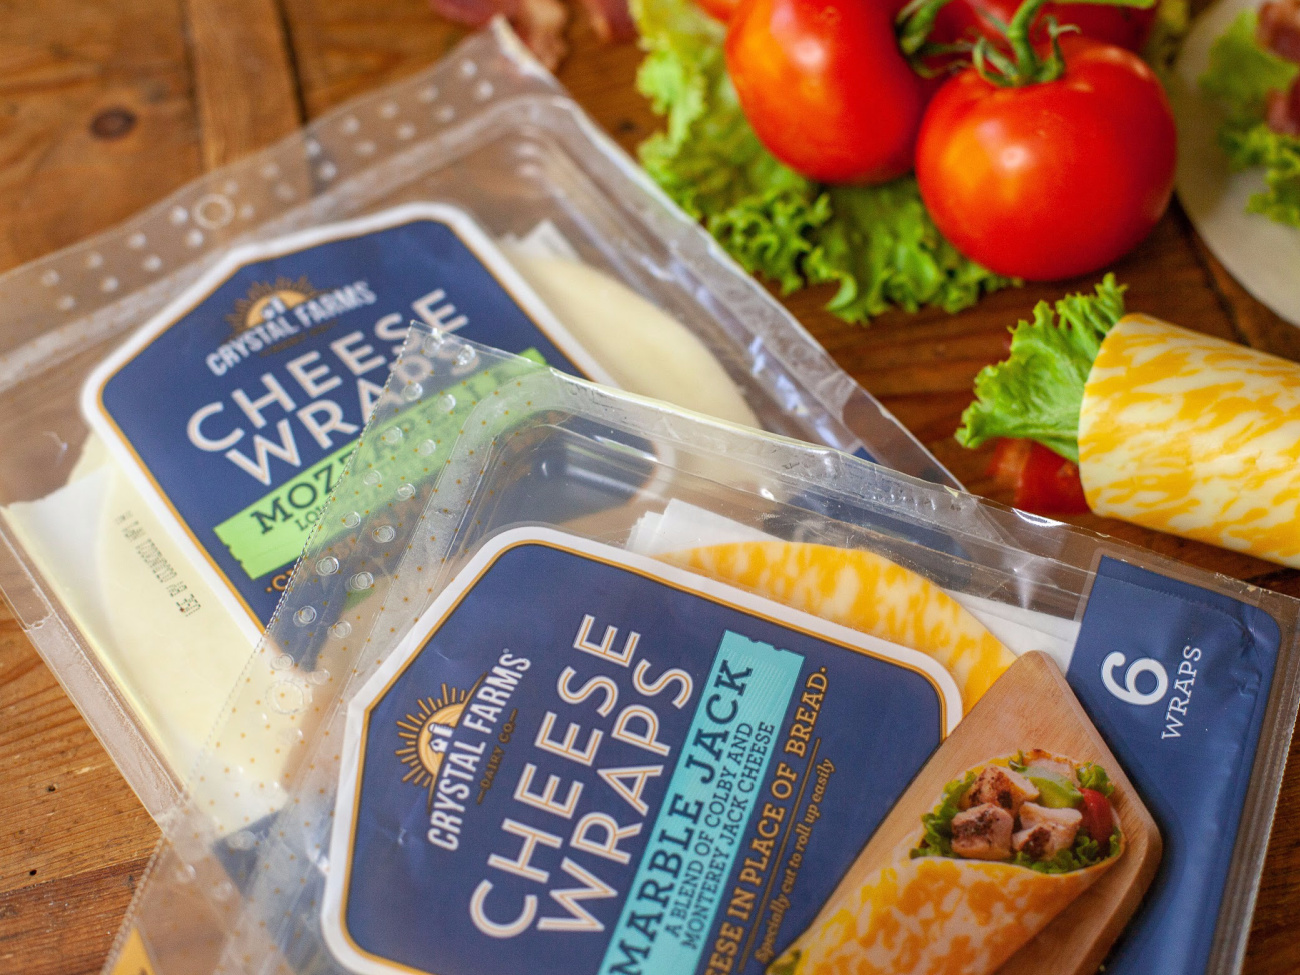 Get Crystal Farms Cheese Wraps For Just $2.79 At Kroger